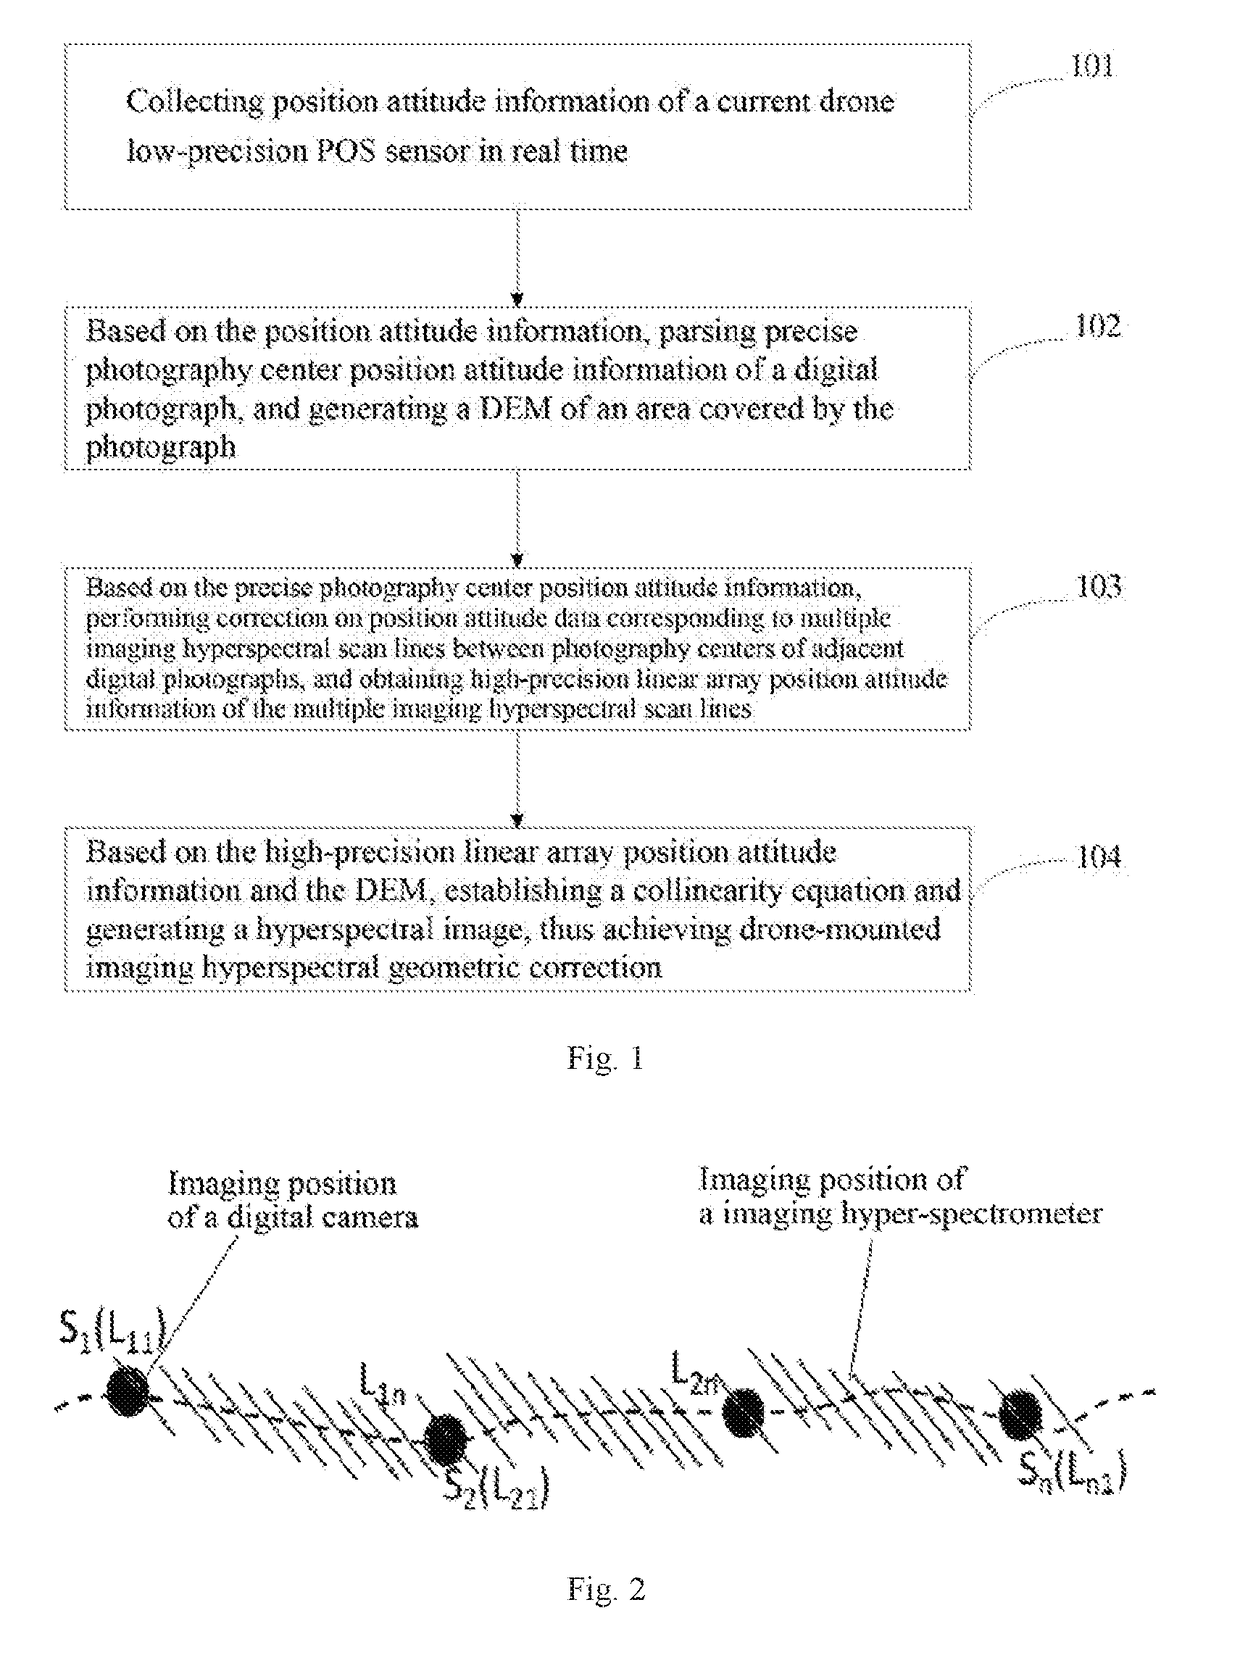 Drone-mounted imaging hyperspectral geometric correction method and system